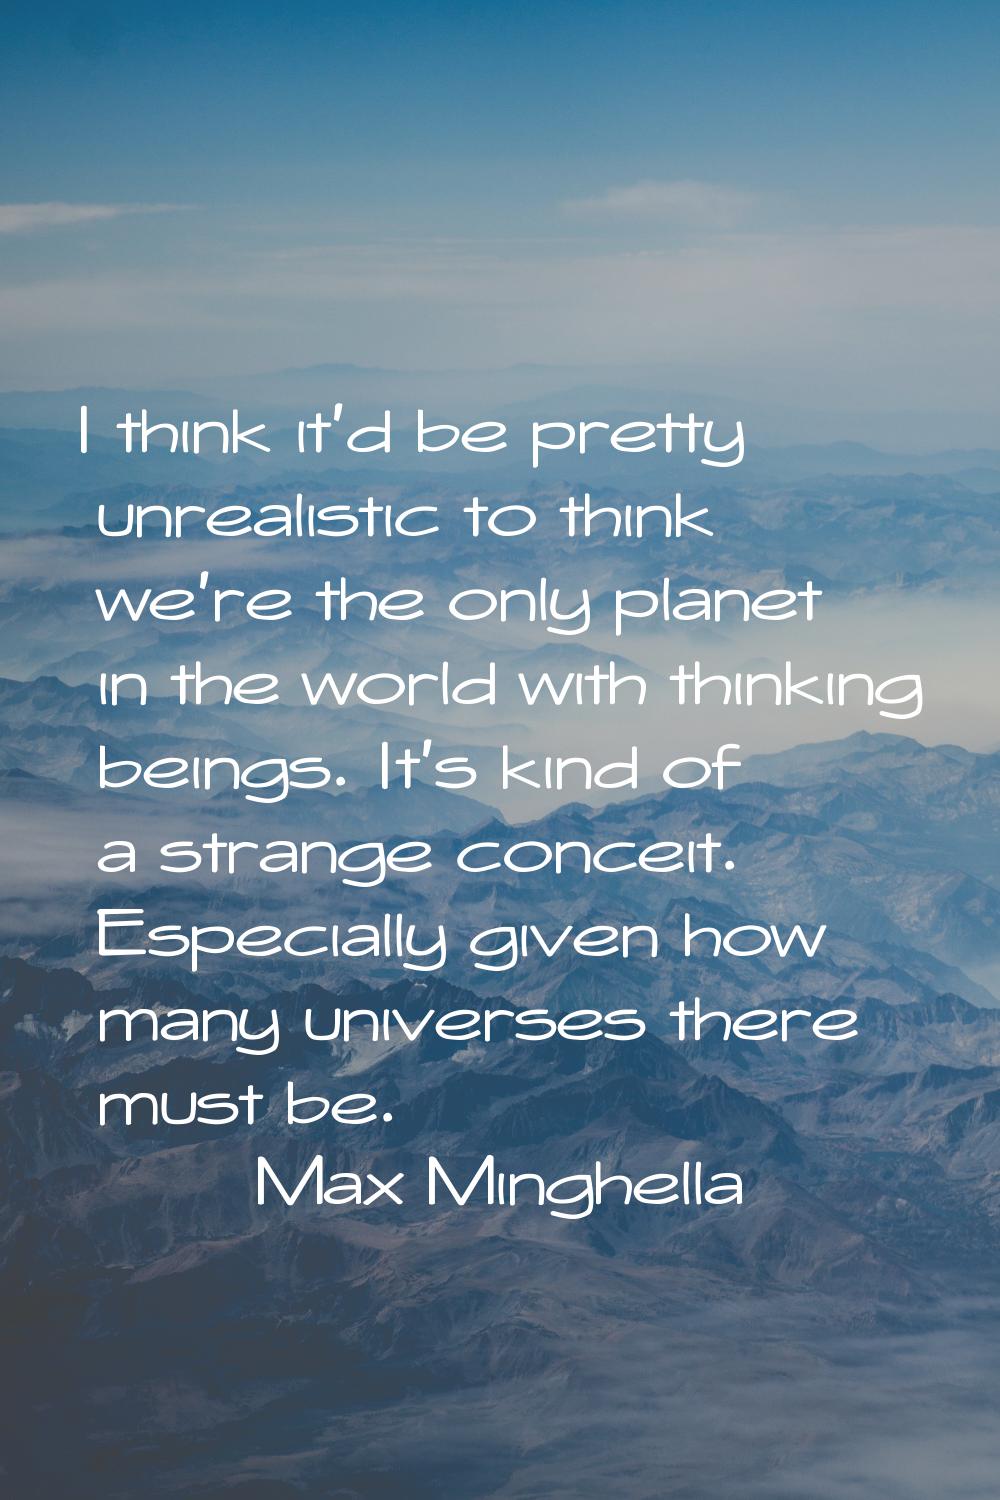 I think it'd be pretty unrealistic to think we're the only planet in the world with thinking beings